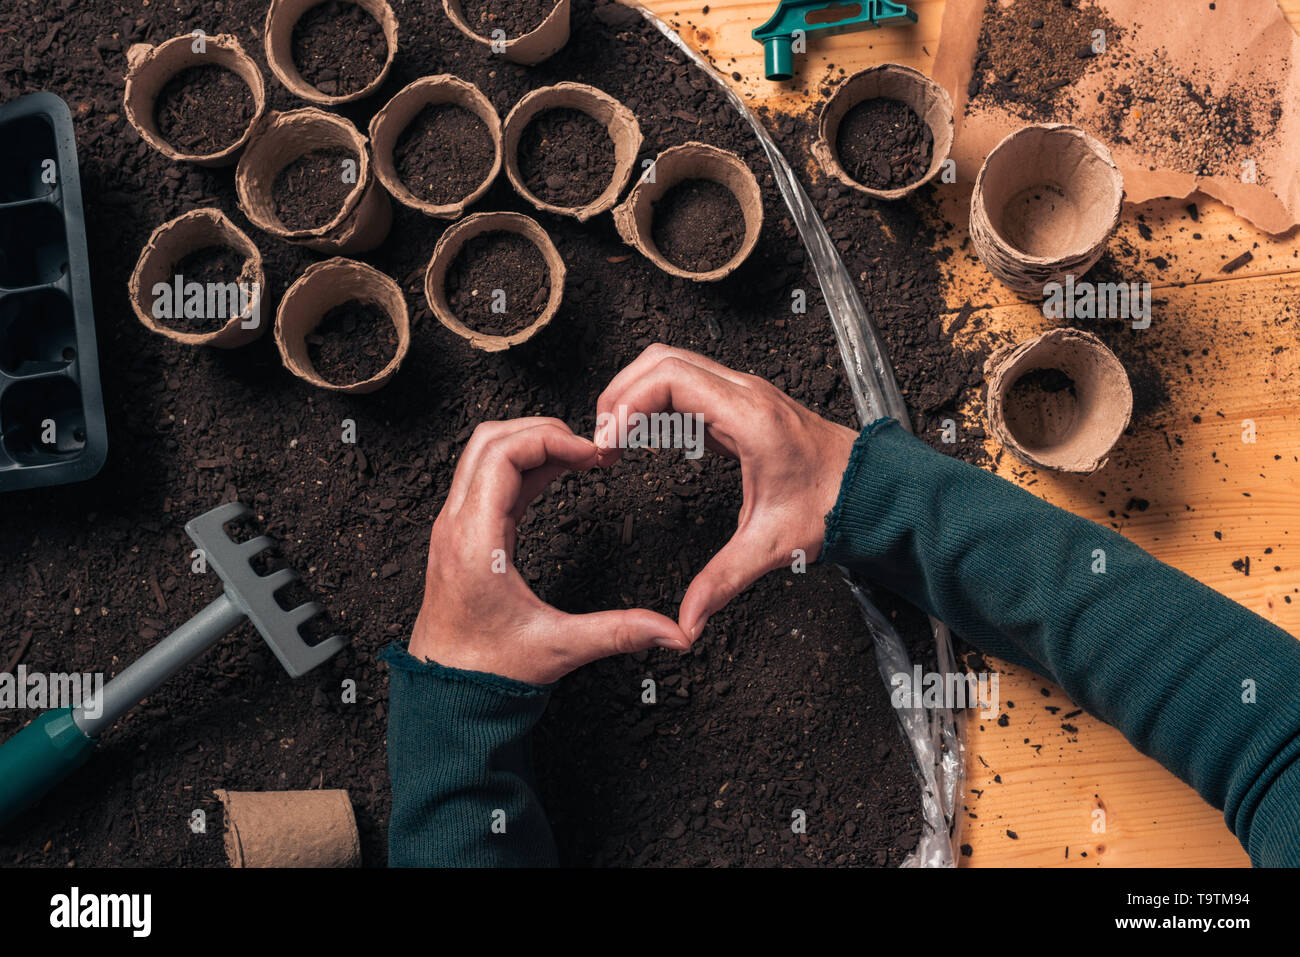 Gardener hand heart gesture over the table with organic gardening and farming equipment, close up of female hands Stock Photo